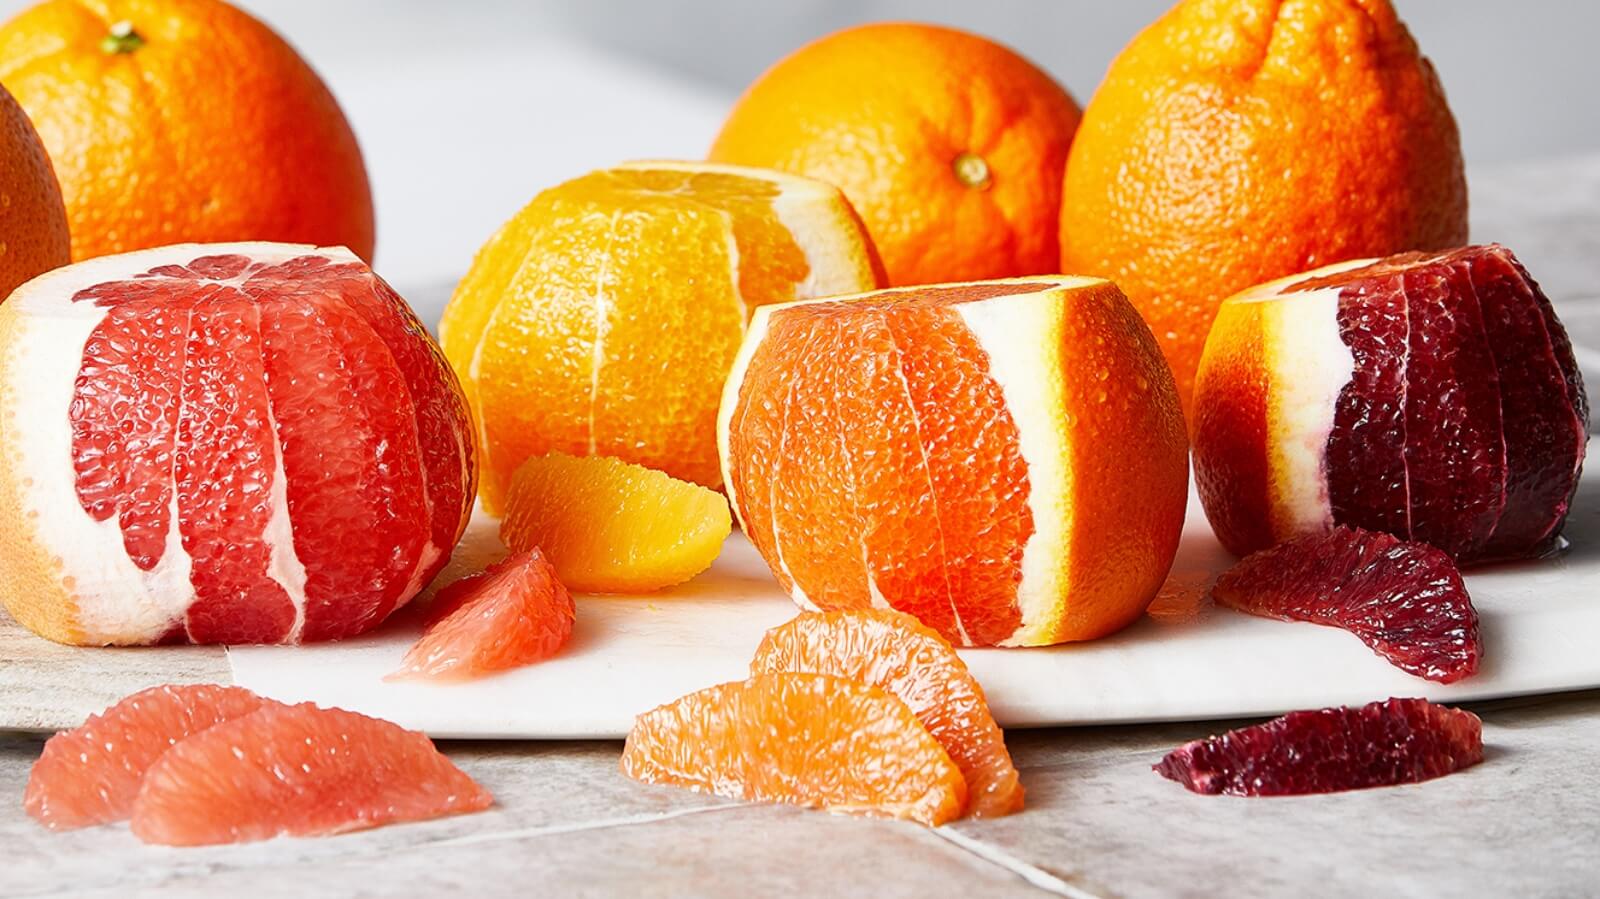 The Fresh Market - So long, winter blues. Hello, winter citrus! Brighten up  your winter menu with these peak-season fruits. ⬇️ 🍊 Mini Me Mandarins:  Beat any colds going around with a